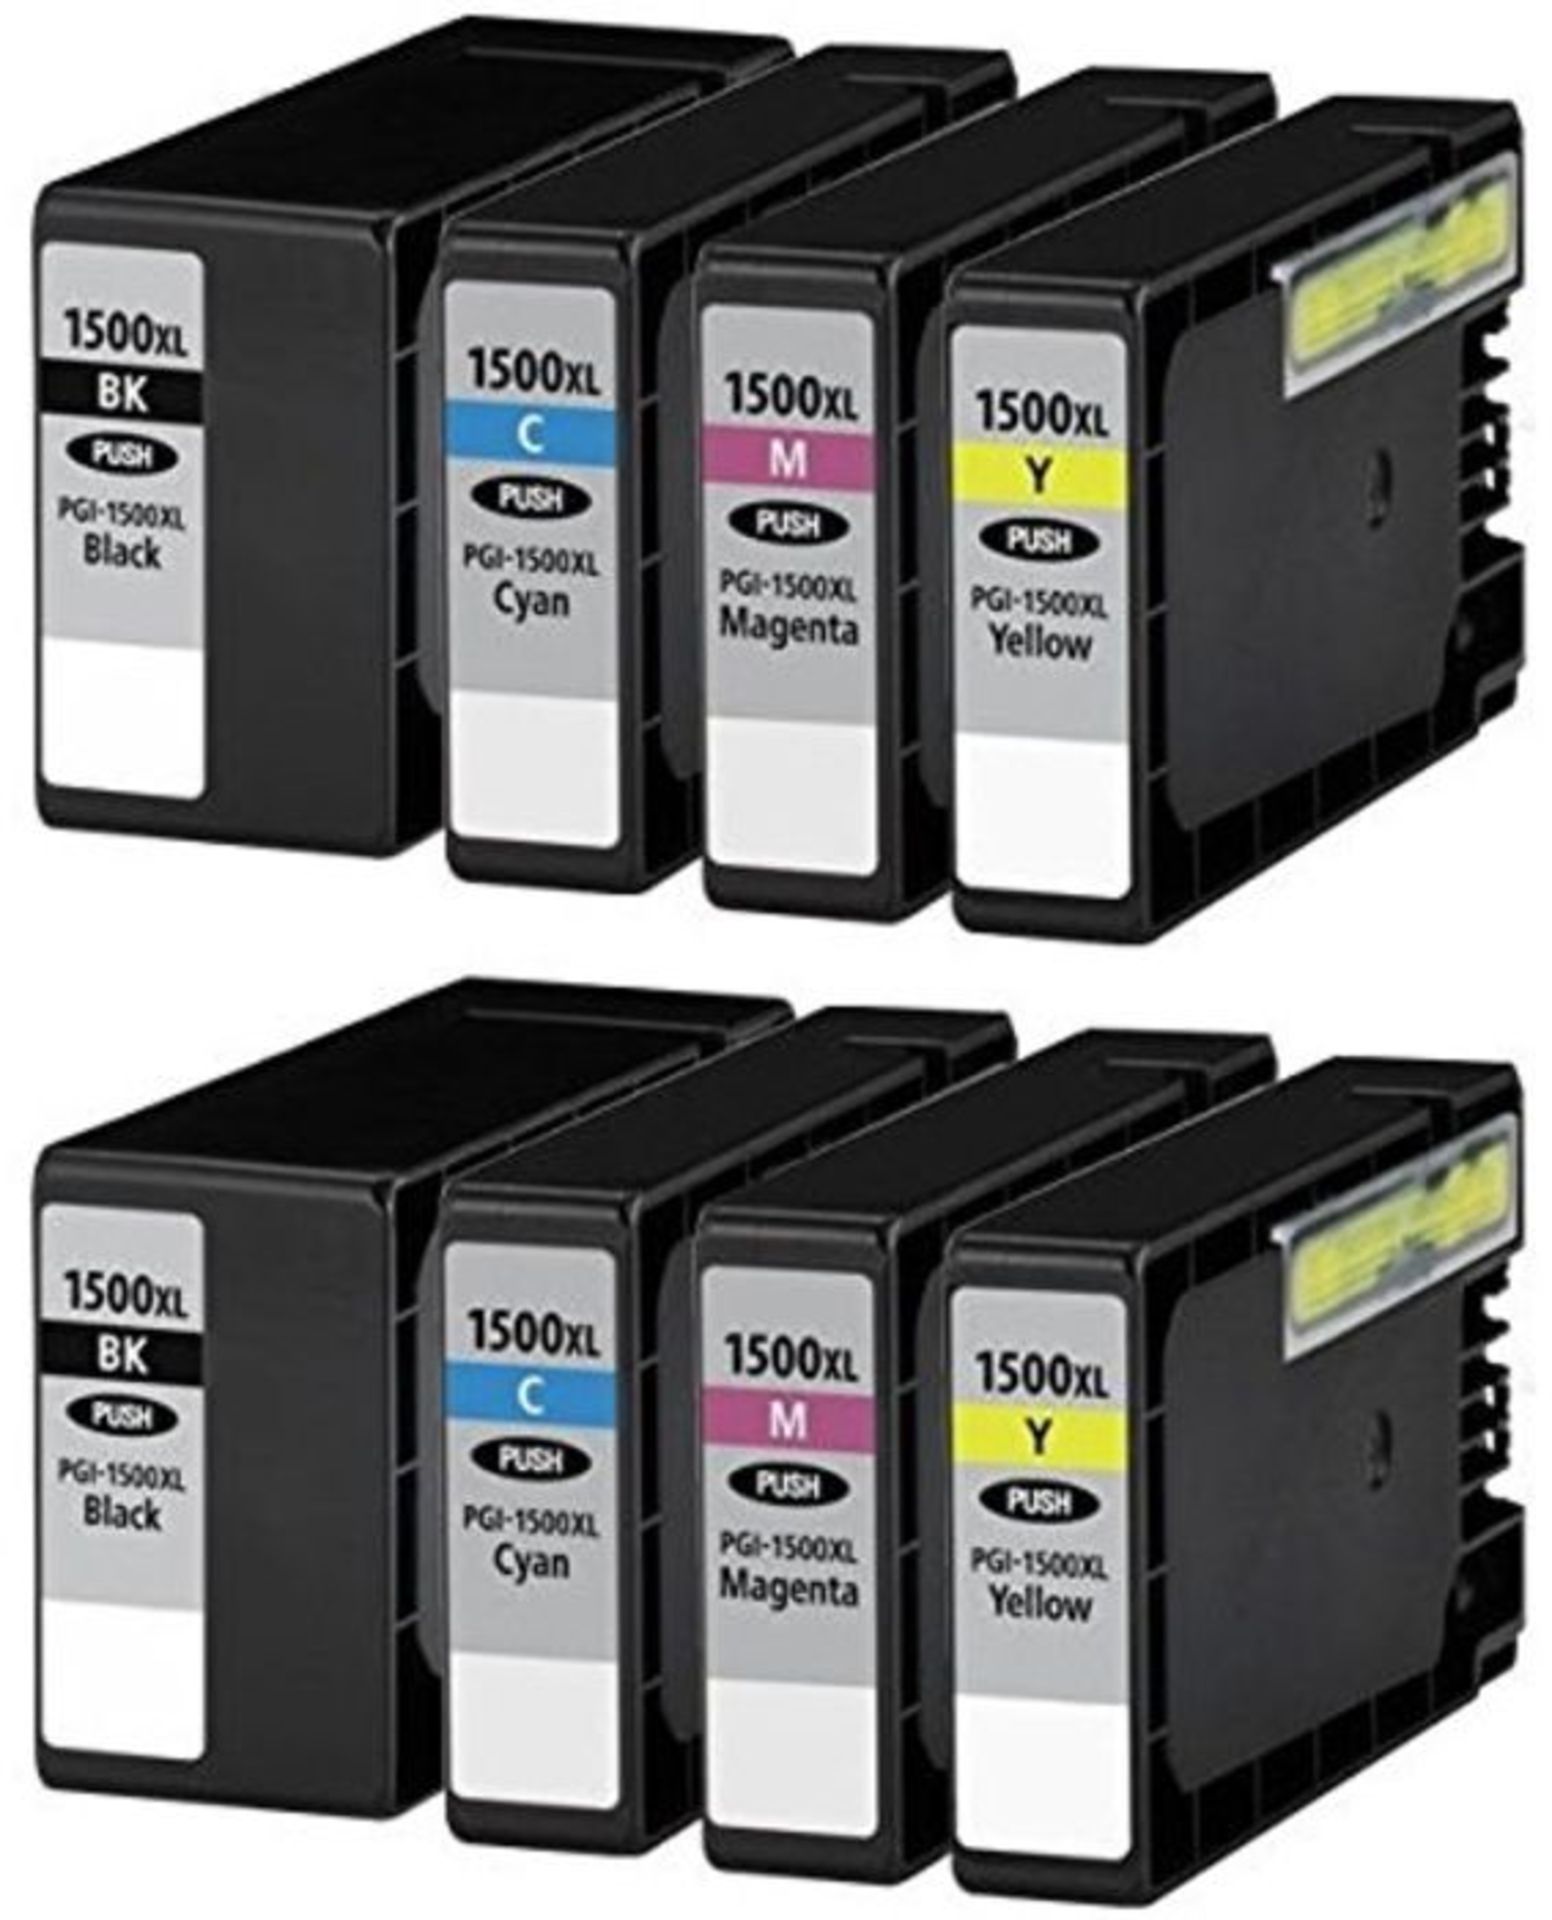 8 (2 SETS) Compatible Printer Ink Cartridges for Maxify MB2000 Series, MB2050, MB2300